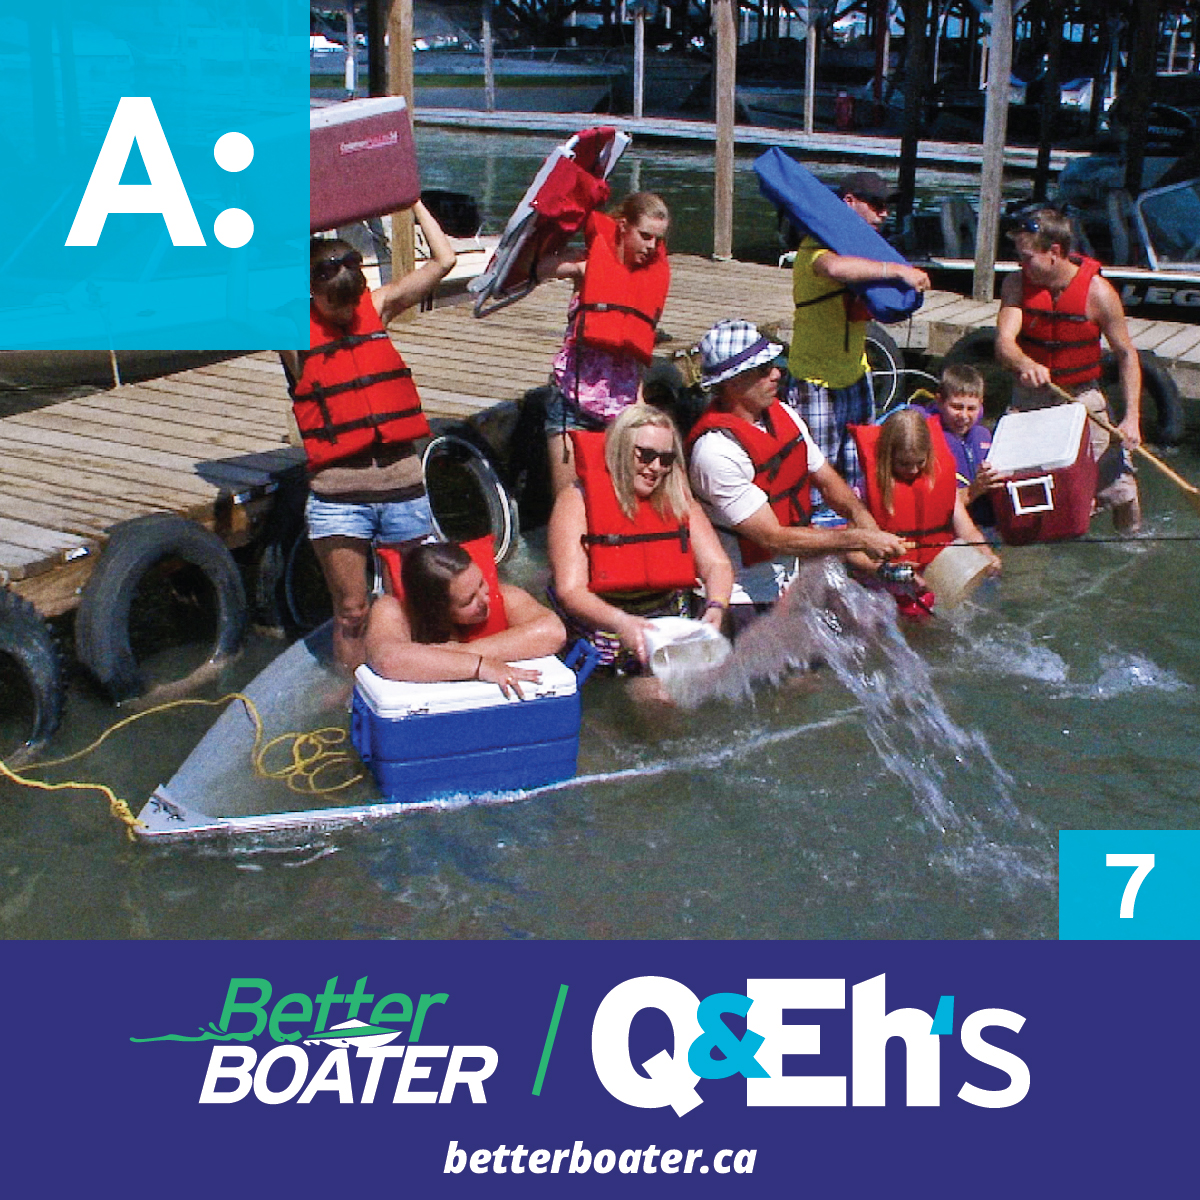 https://betterboater.ca/Q&Eh:%20Loading%20Boat